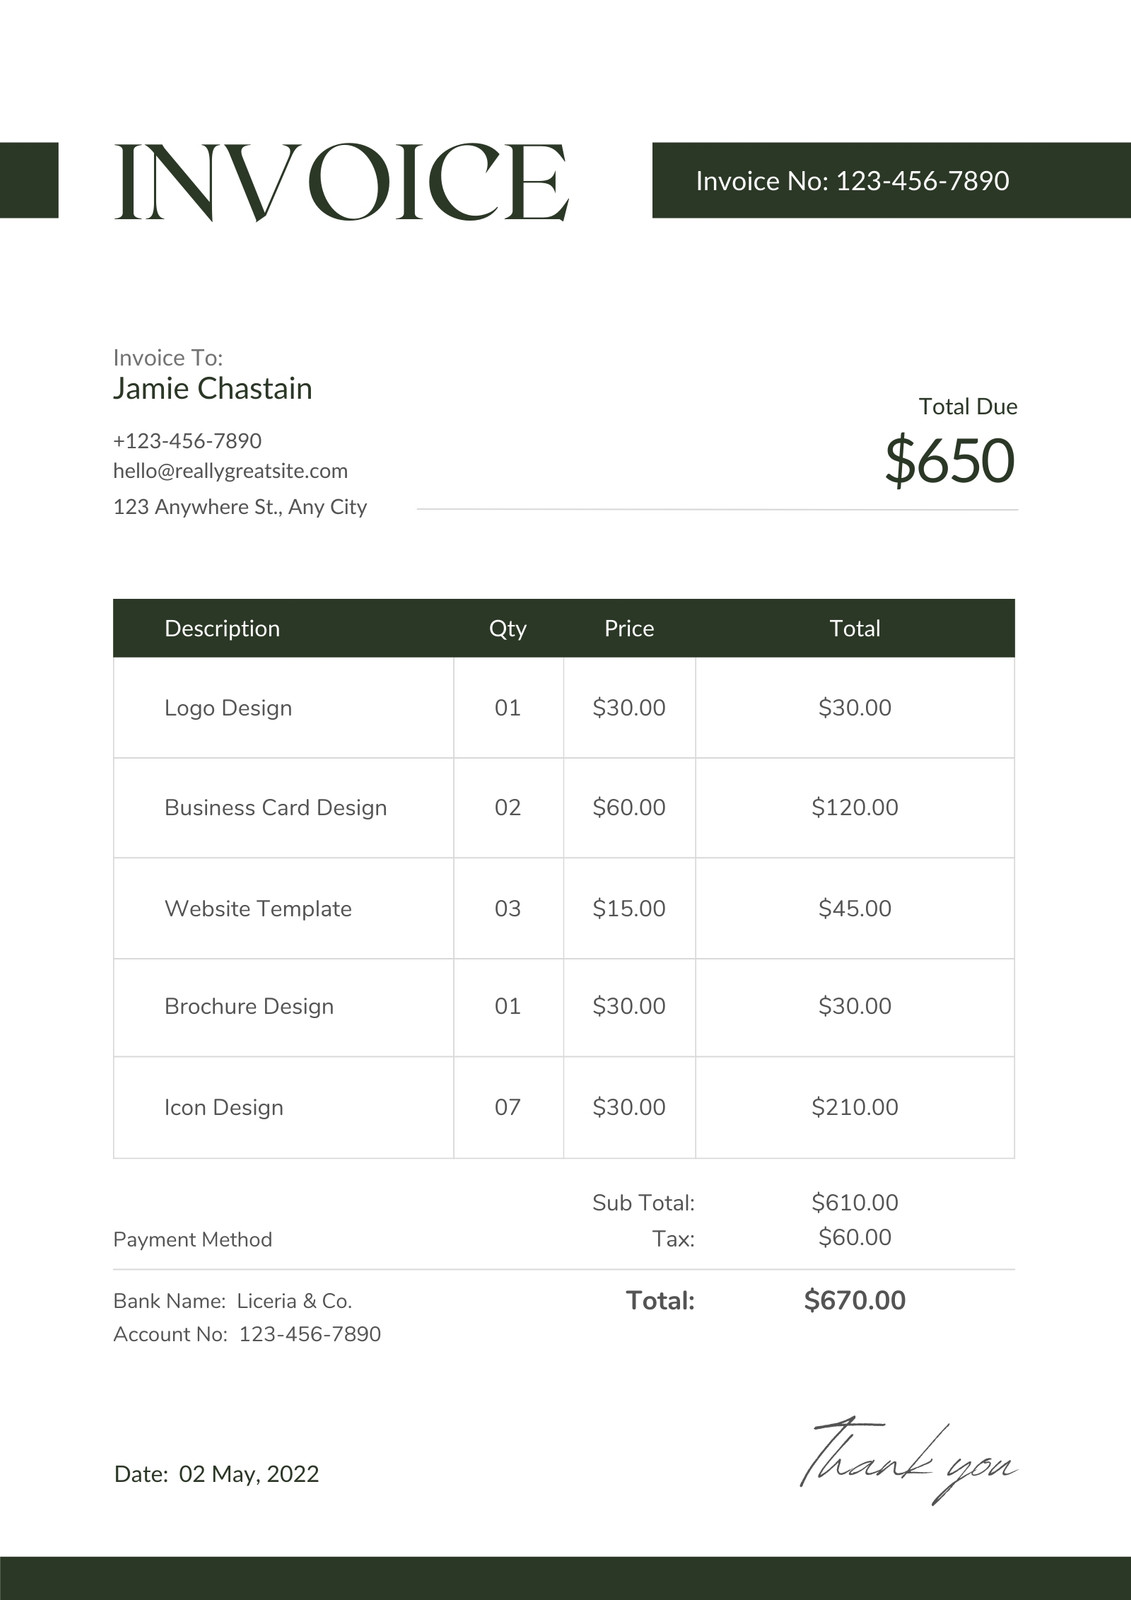 Page 3 - Free custom printable business invoice templates | Canva